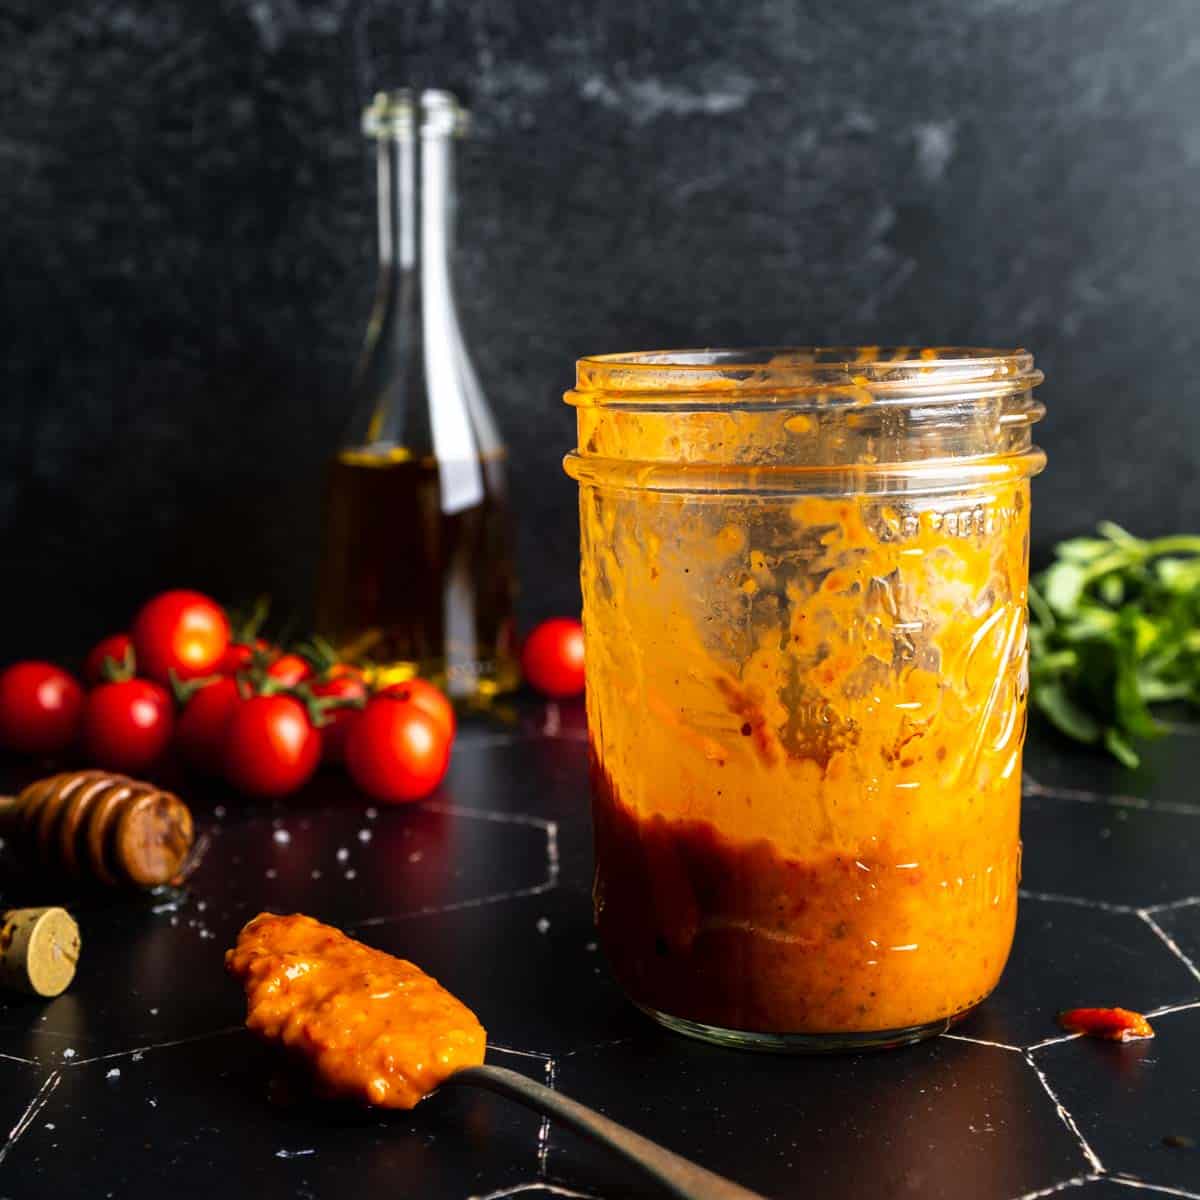 Finished roasted tomato vinaigrette in a jar and on a spoon